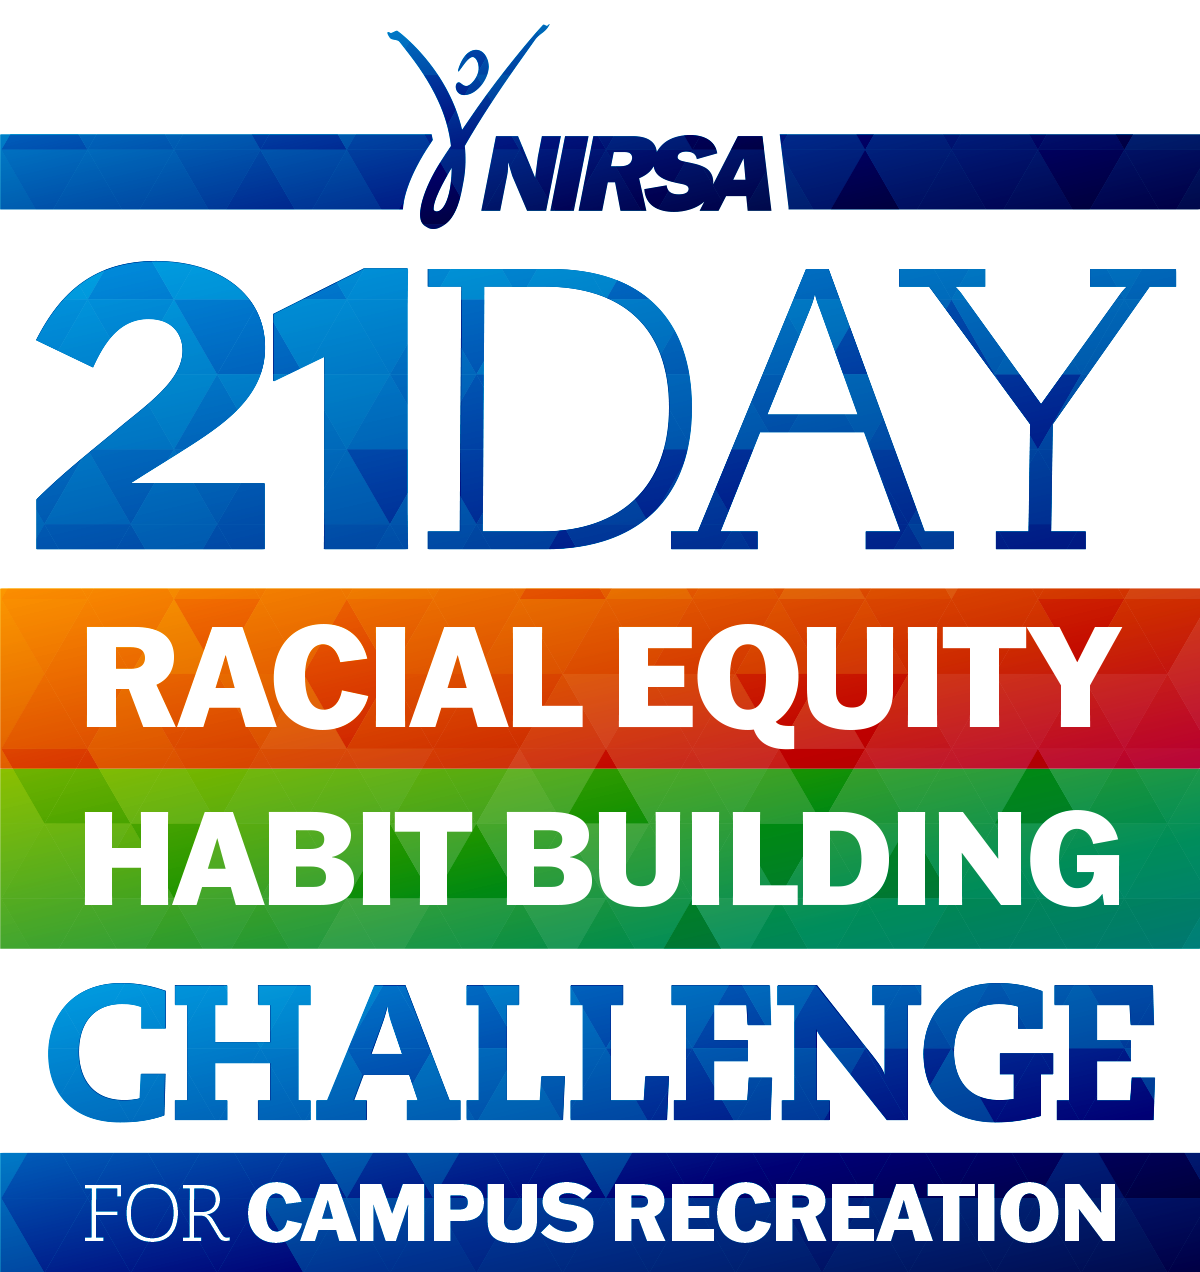 NIRSA’s 21-Day Racial Equity Habit Building Challenge for campus recreation